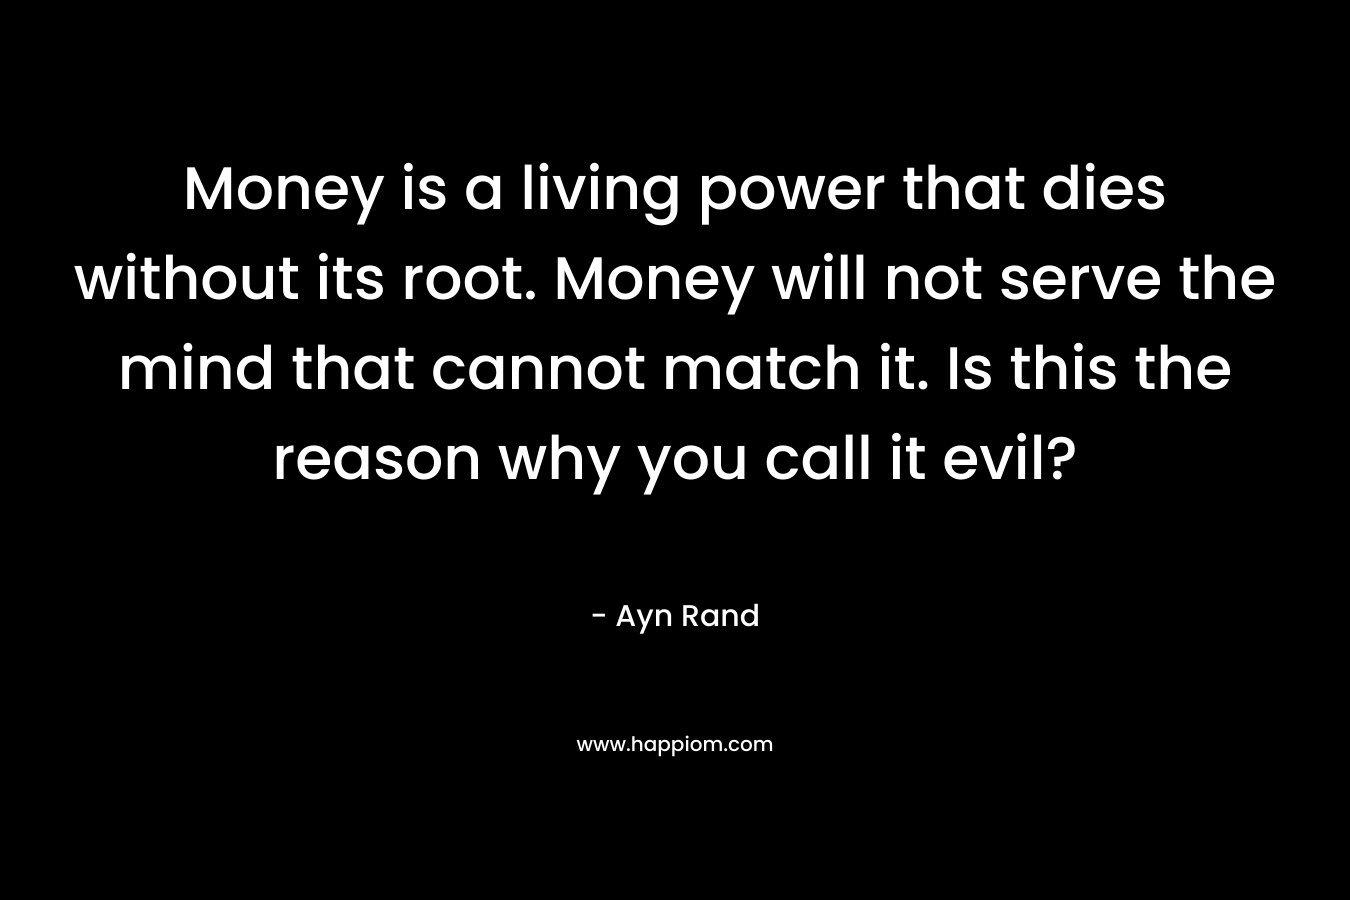 Money is a living power that dies without its root. Money will not serve the mind that cannot match it. Is this the reason why you call it evil?